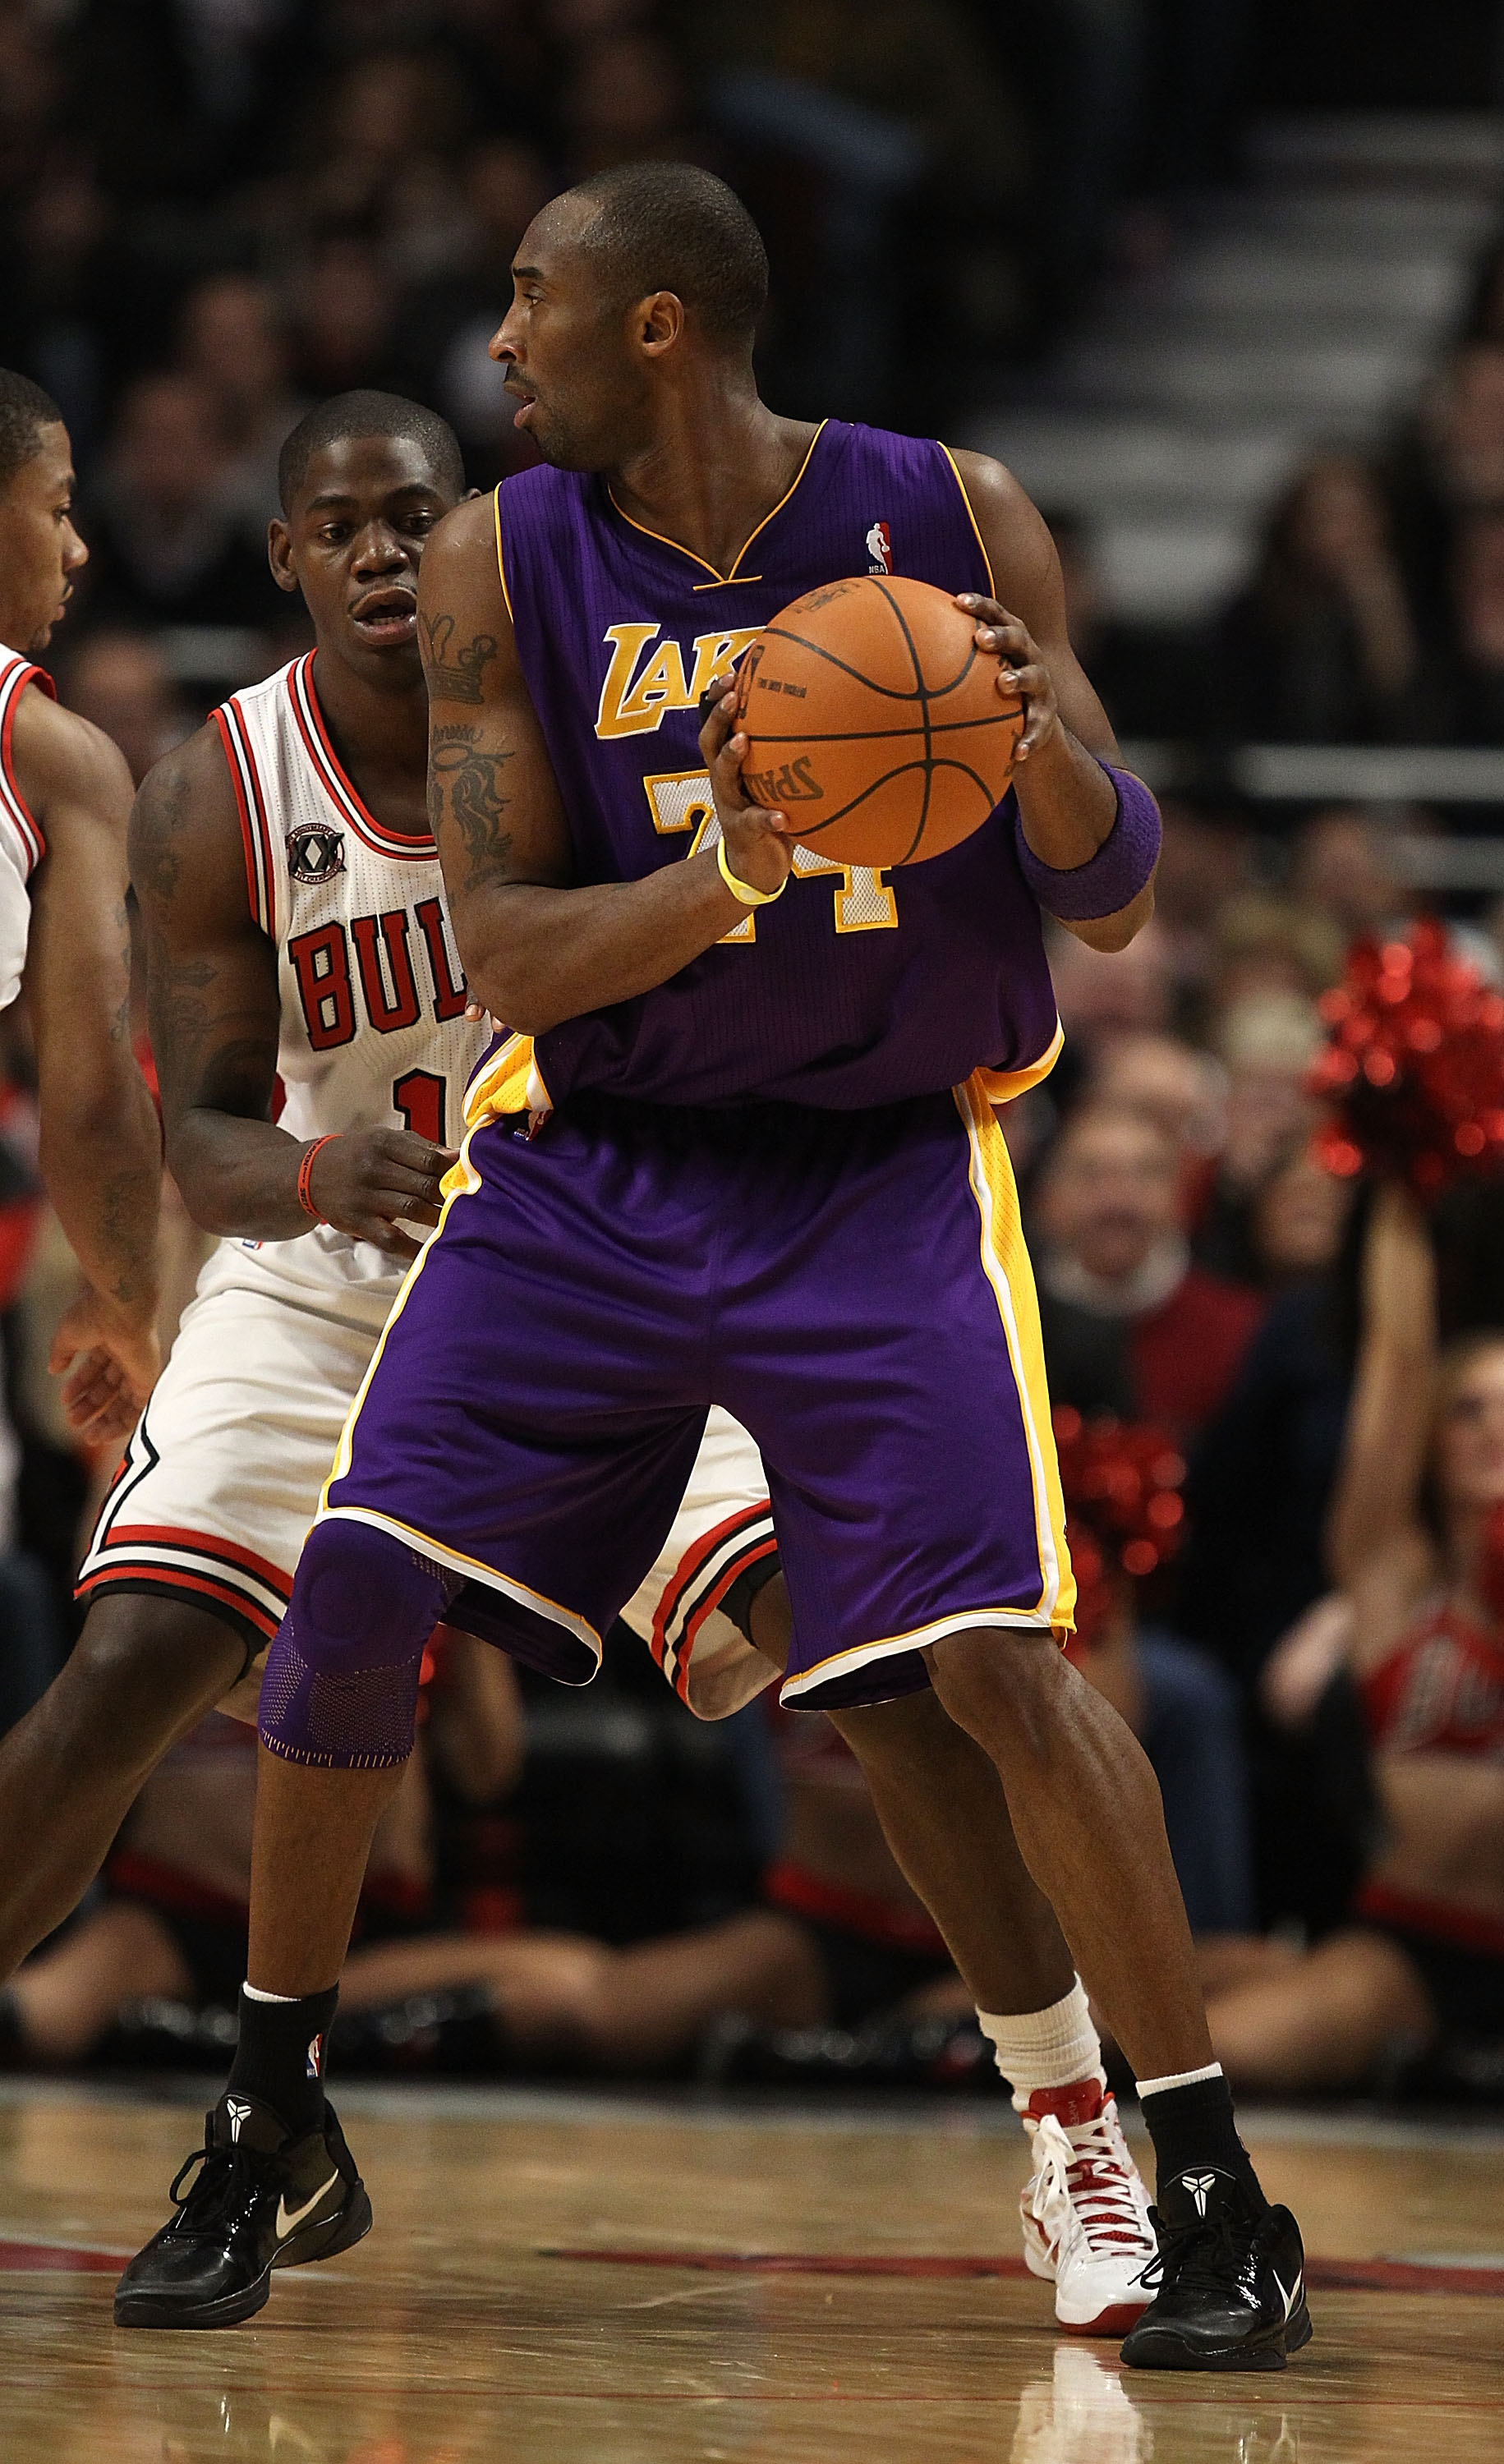 CHICAGO, IL - DECEMBER 10: Kobe Bryant #24 of the Los Angeles Lakers looks to pass as Ronnie Brewer #11 of the Chicago Bulls defends at the United Center on December 10, 2010 in Chicago, Illinois. The Bulls defeated the Lakers 88-84. NOTE TO USER: User ex